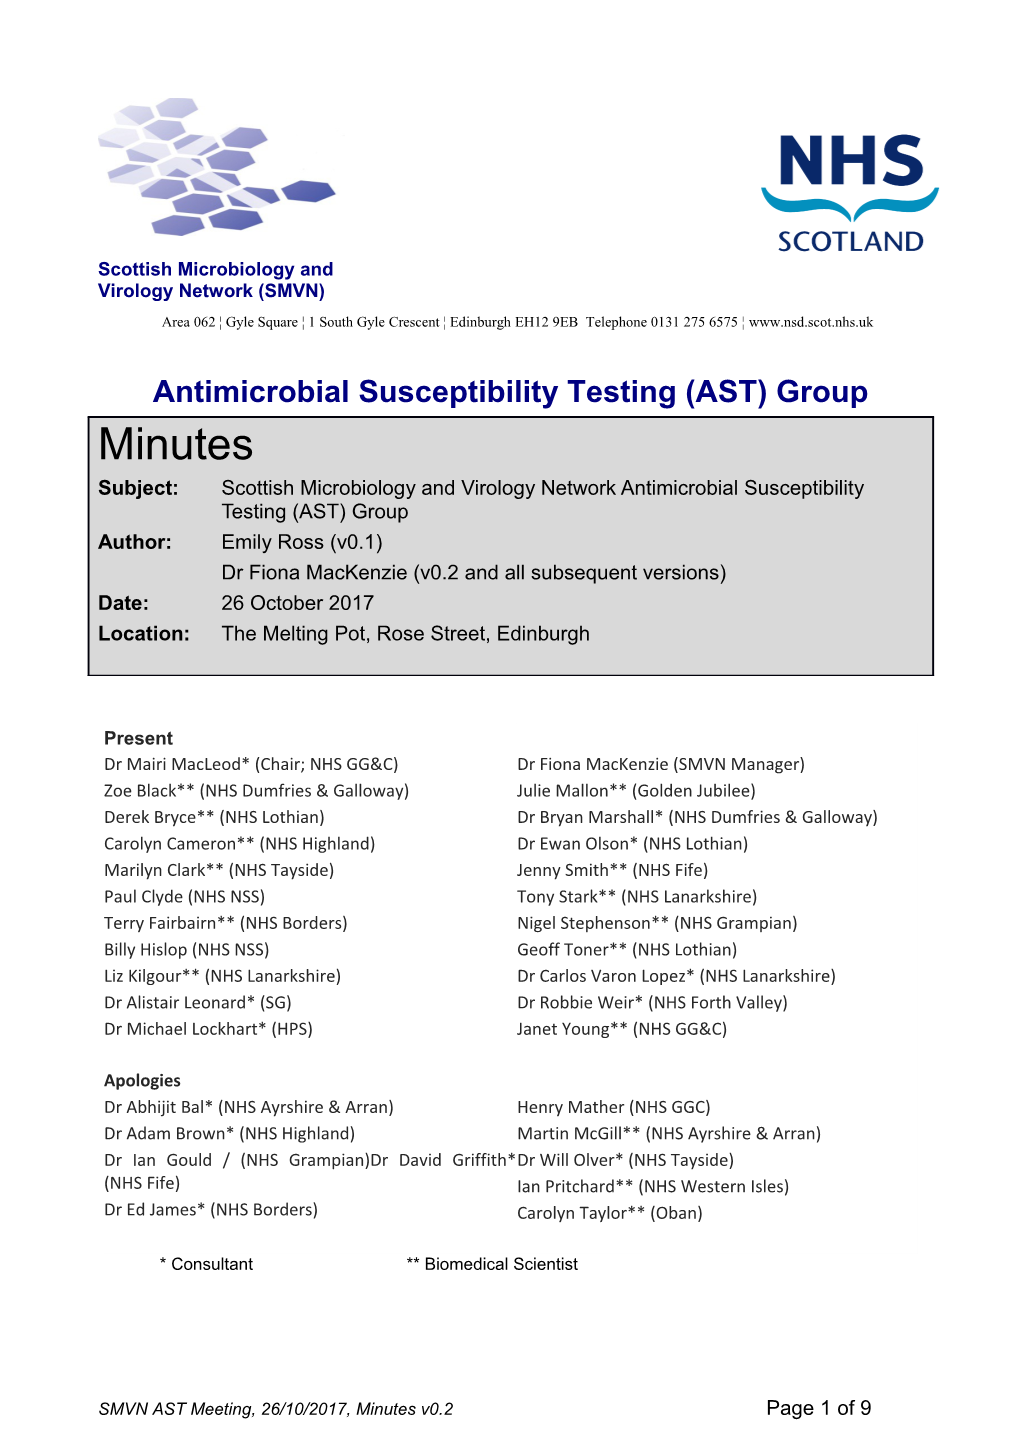 Antimicrobial Susceptibility Testing (AST) Group